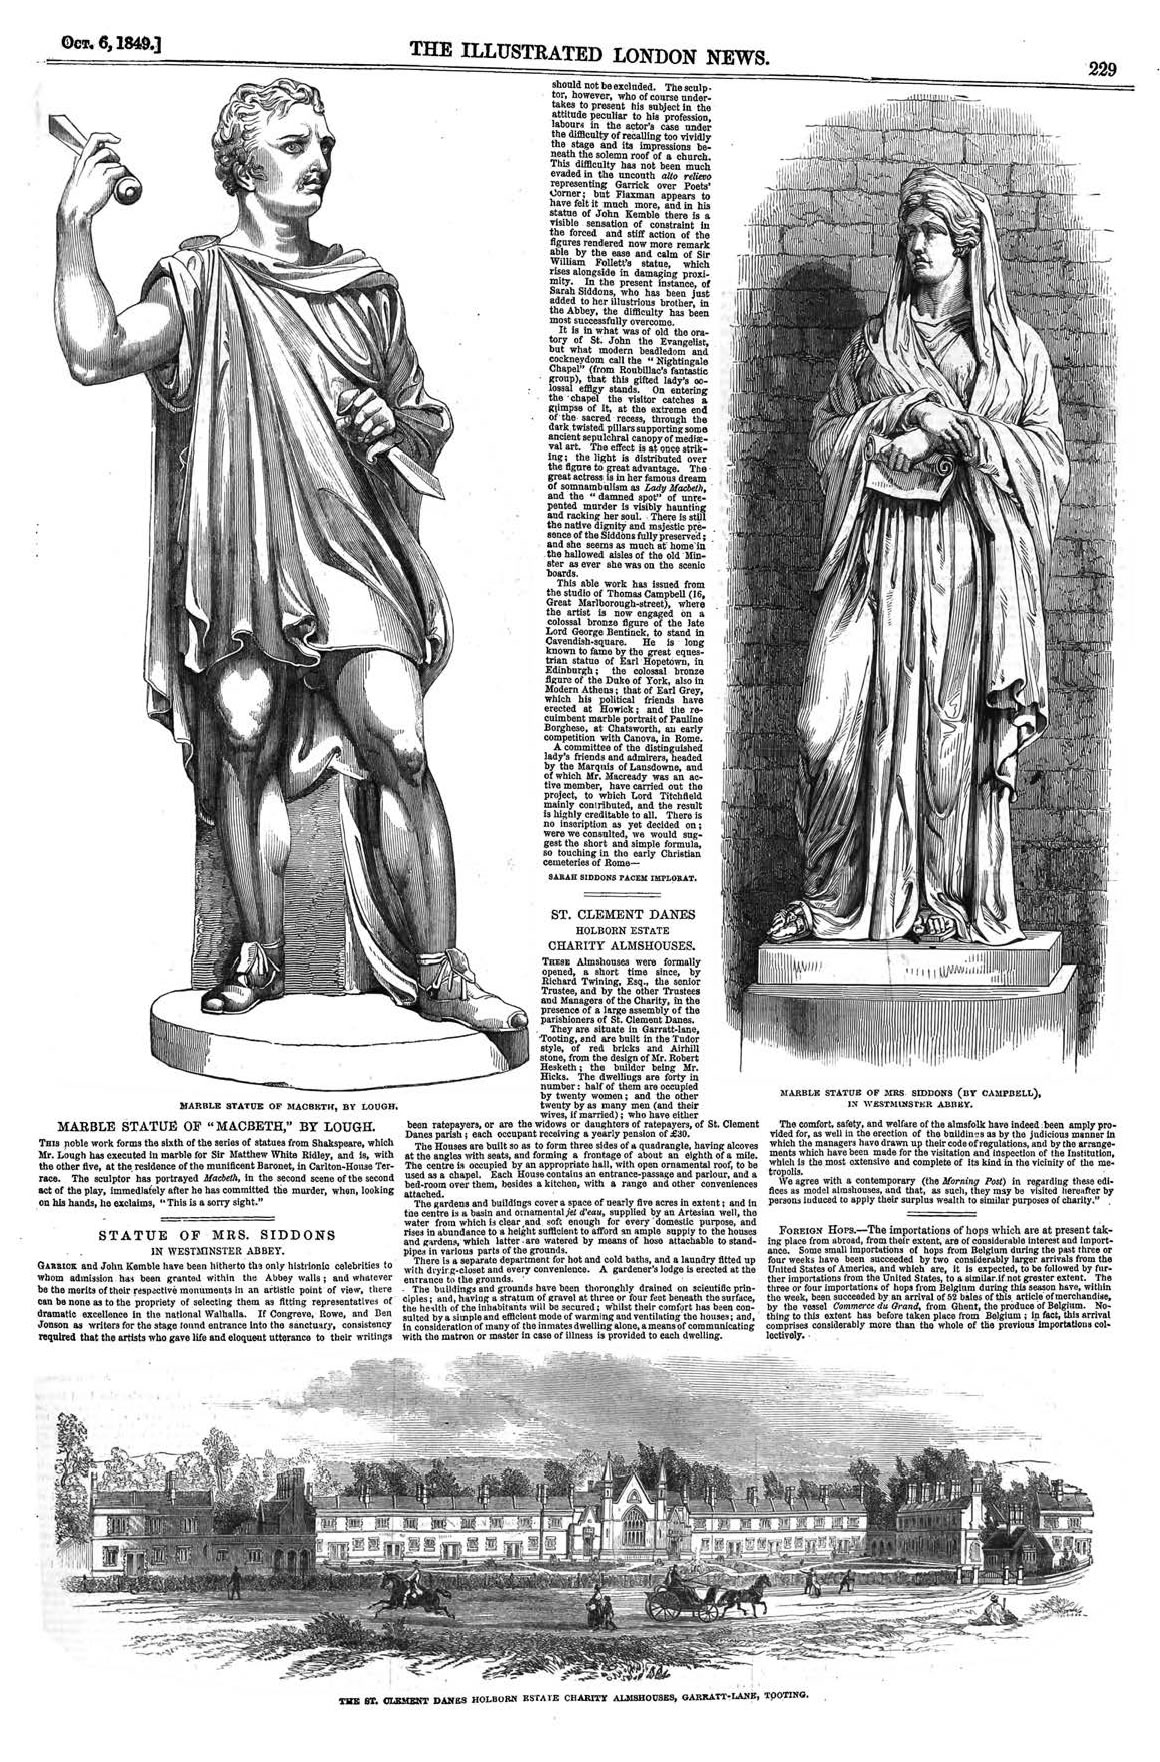 The Illustrated London News Oct 6, 1849 Marble statue of Mrs Siddons and her brother John Kemble